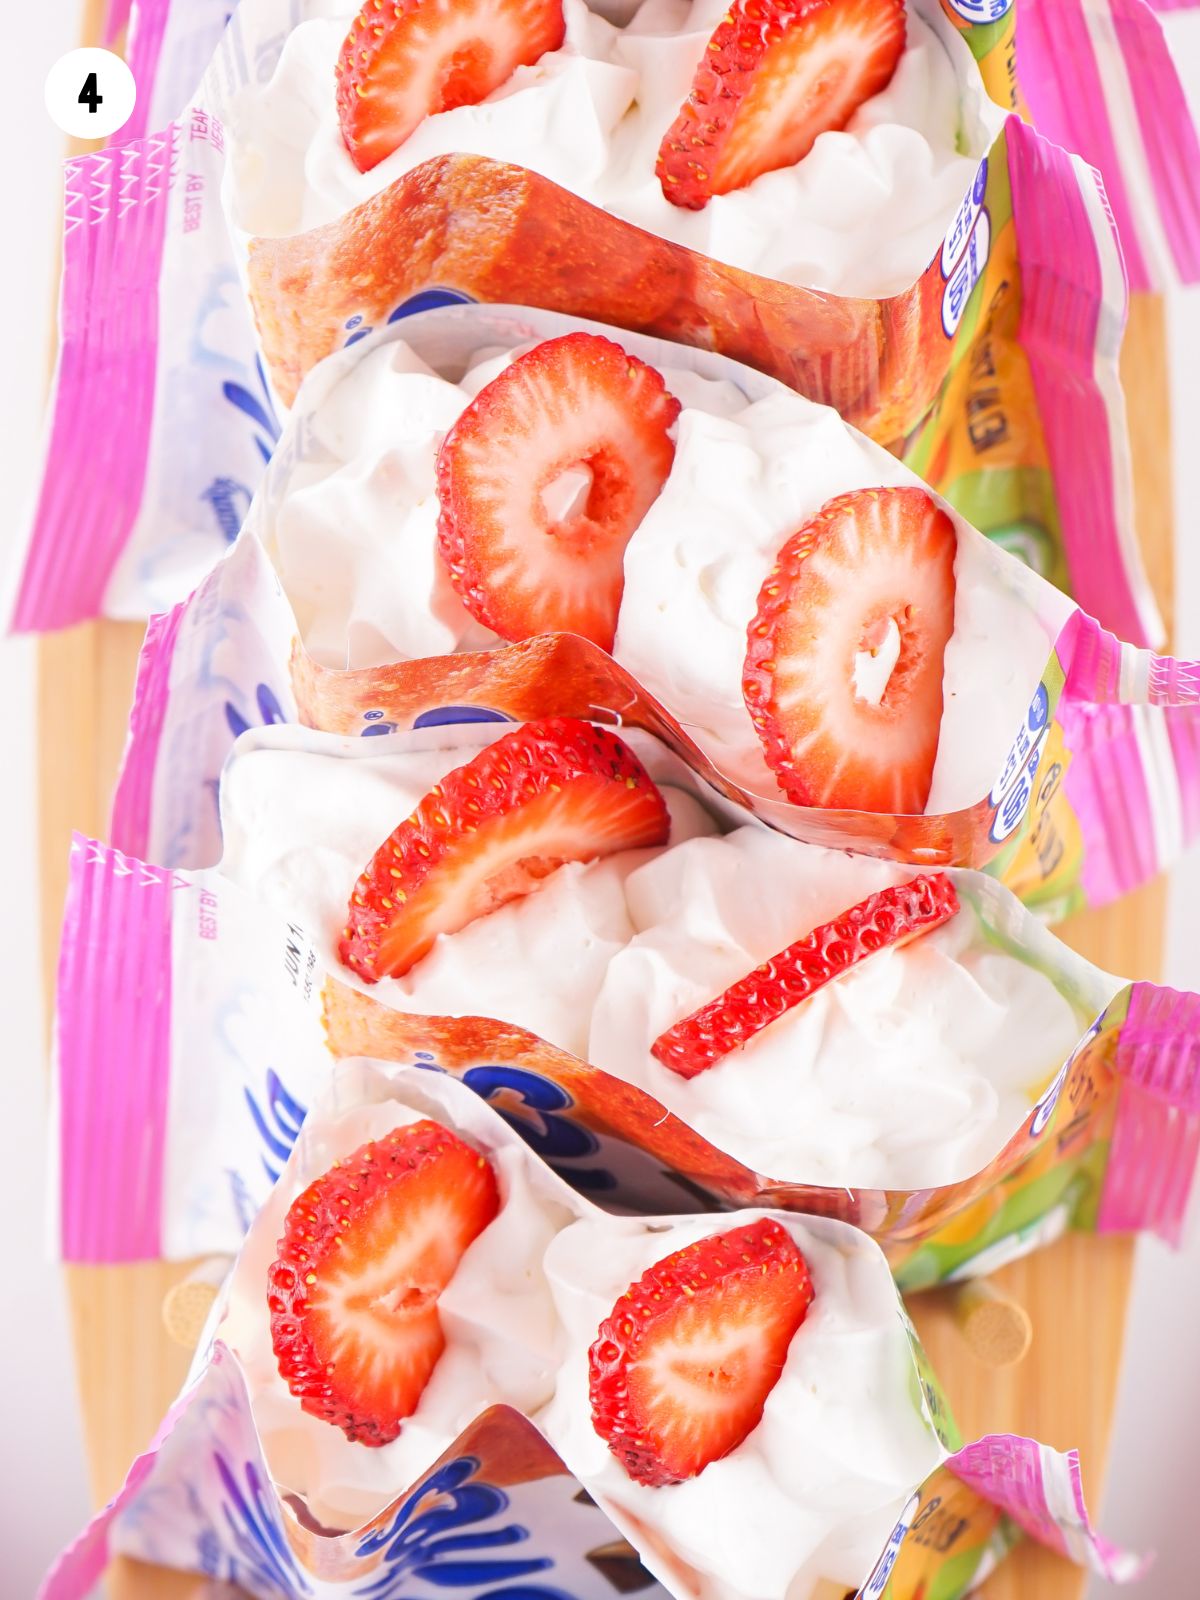 top the bag of mini muffins with whipped cream and sliced strawberries.